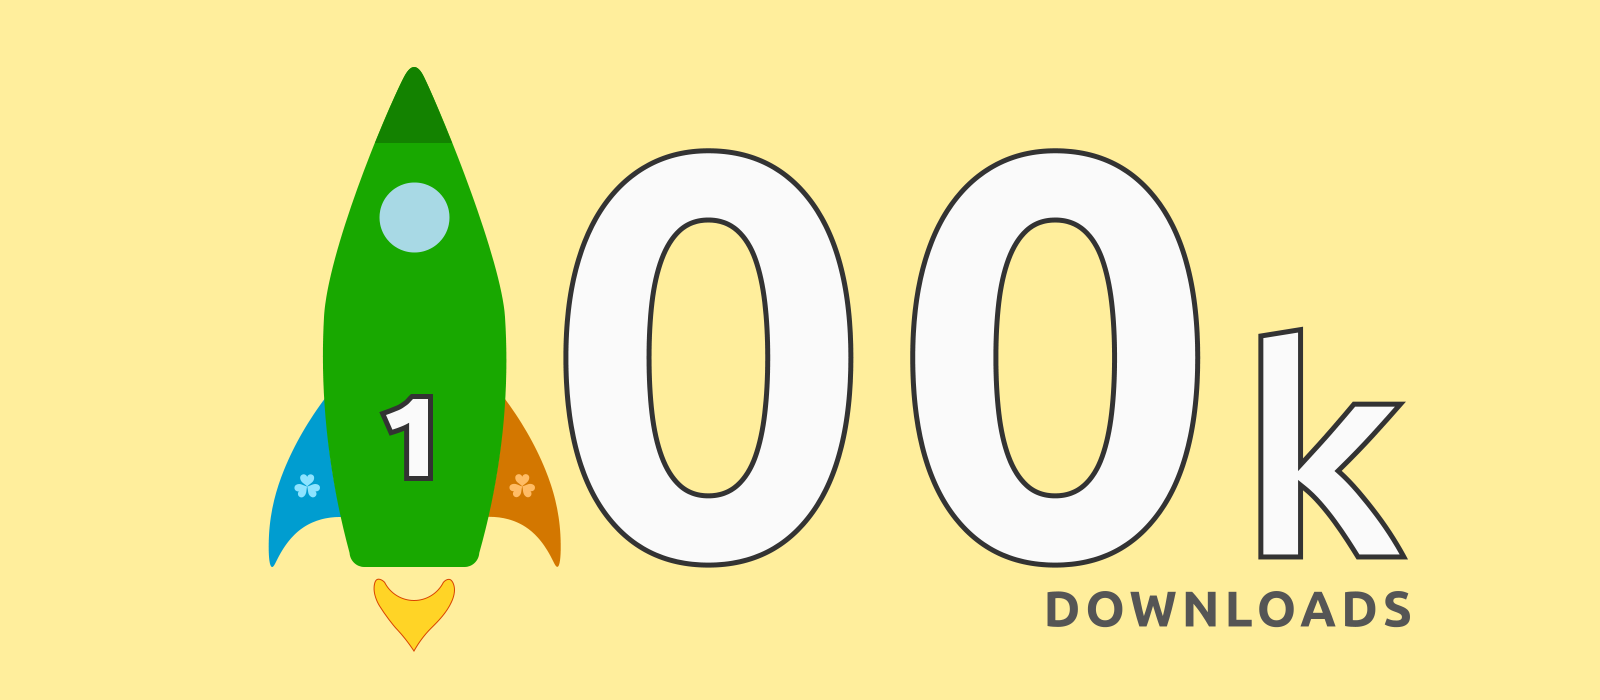 SiteTree Collects its First 100k Downloads